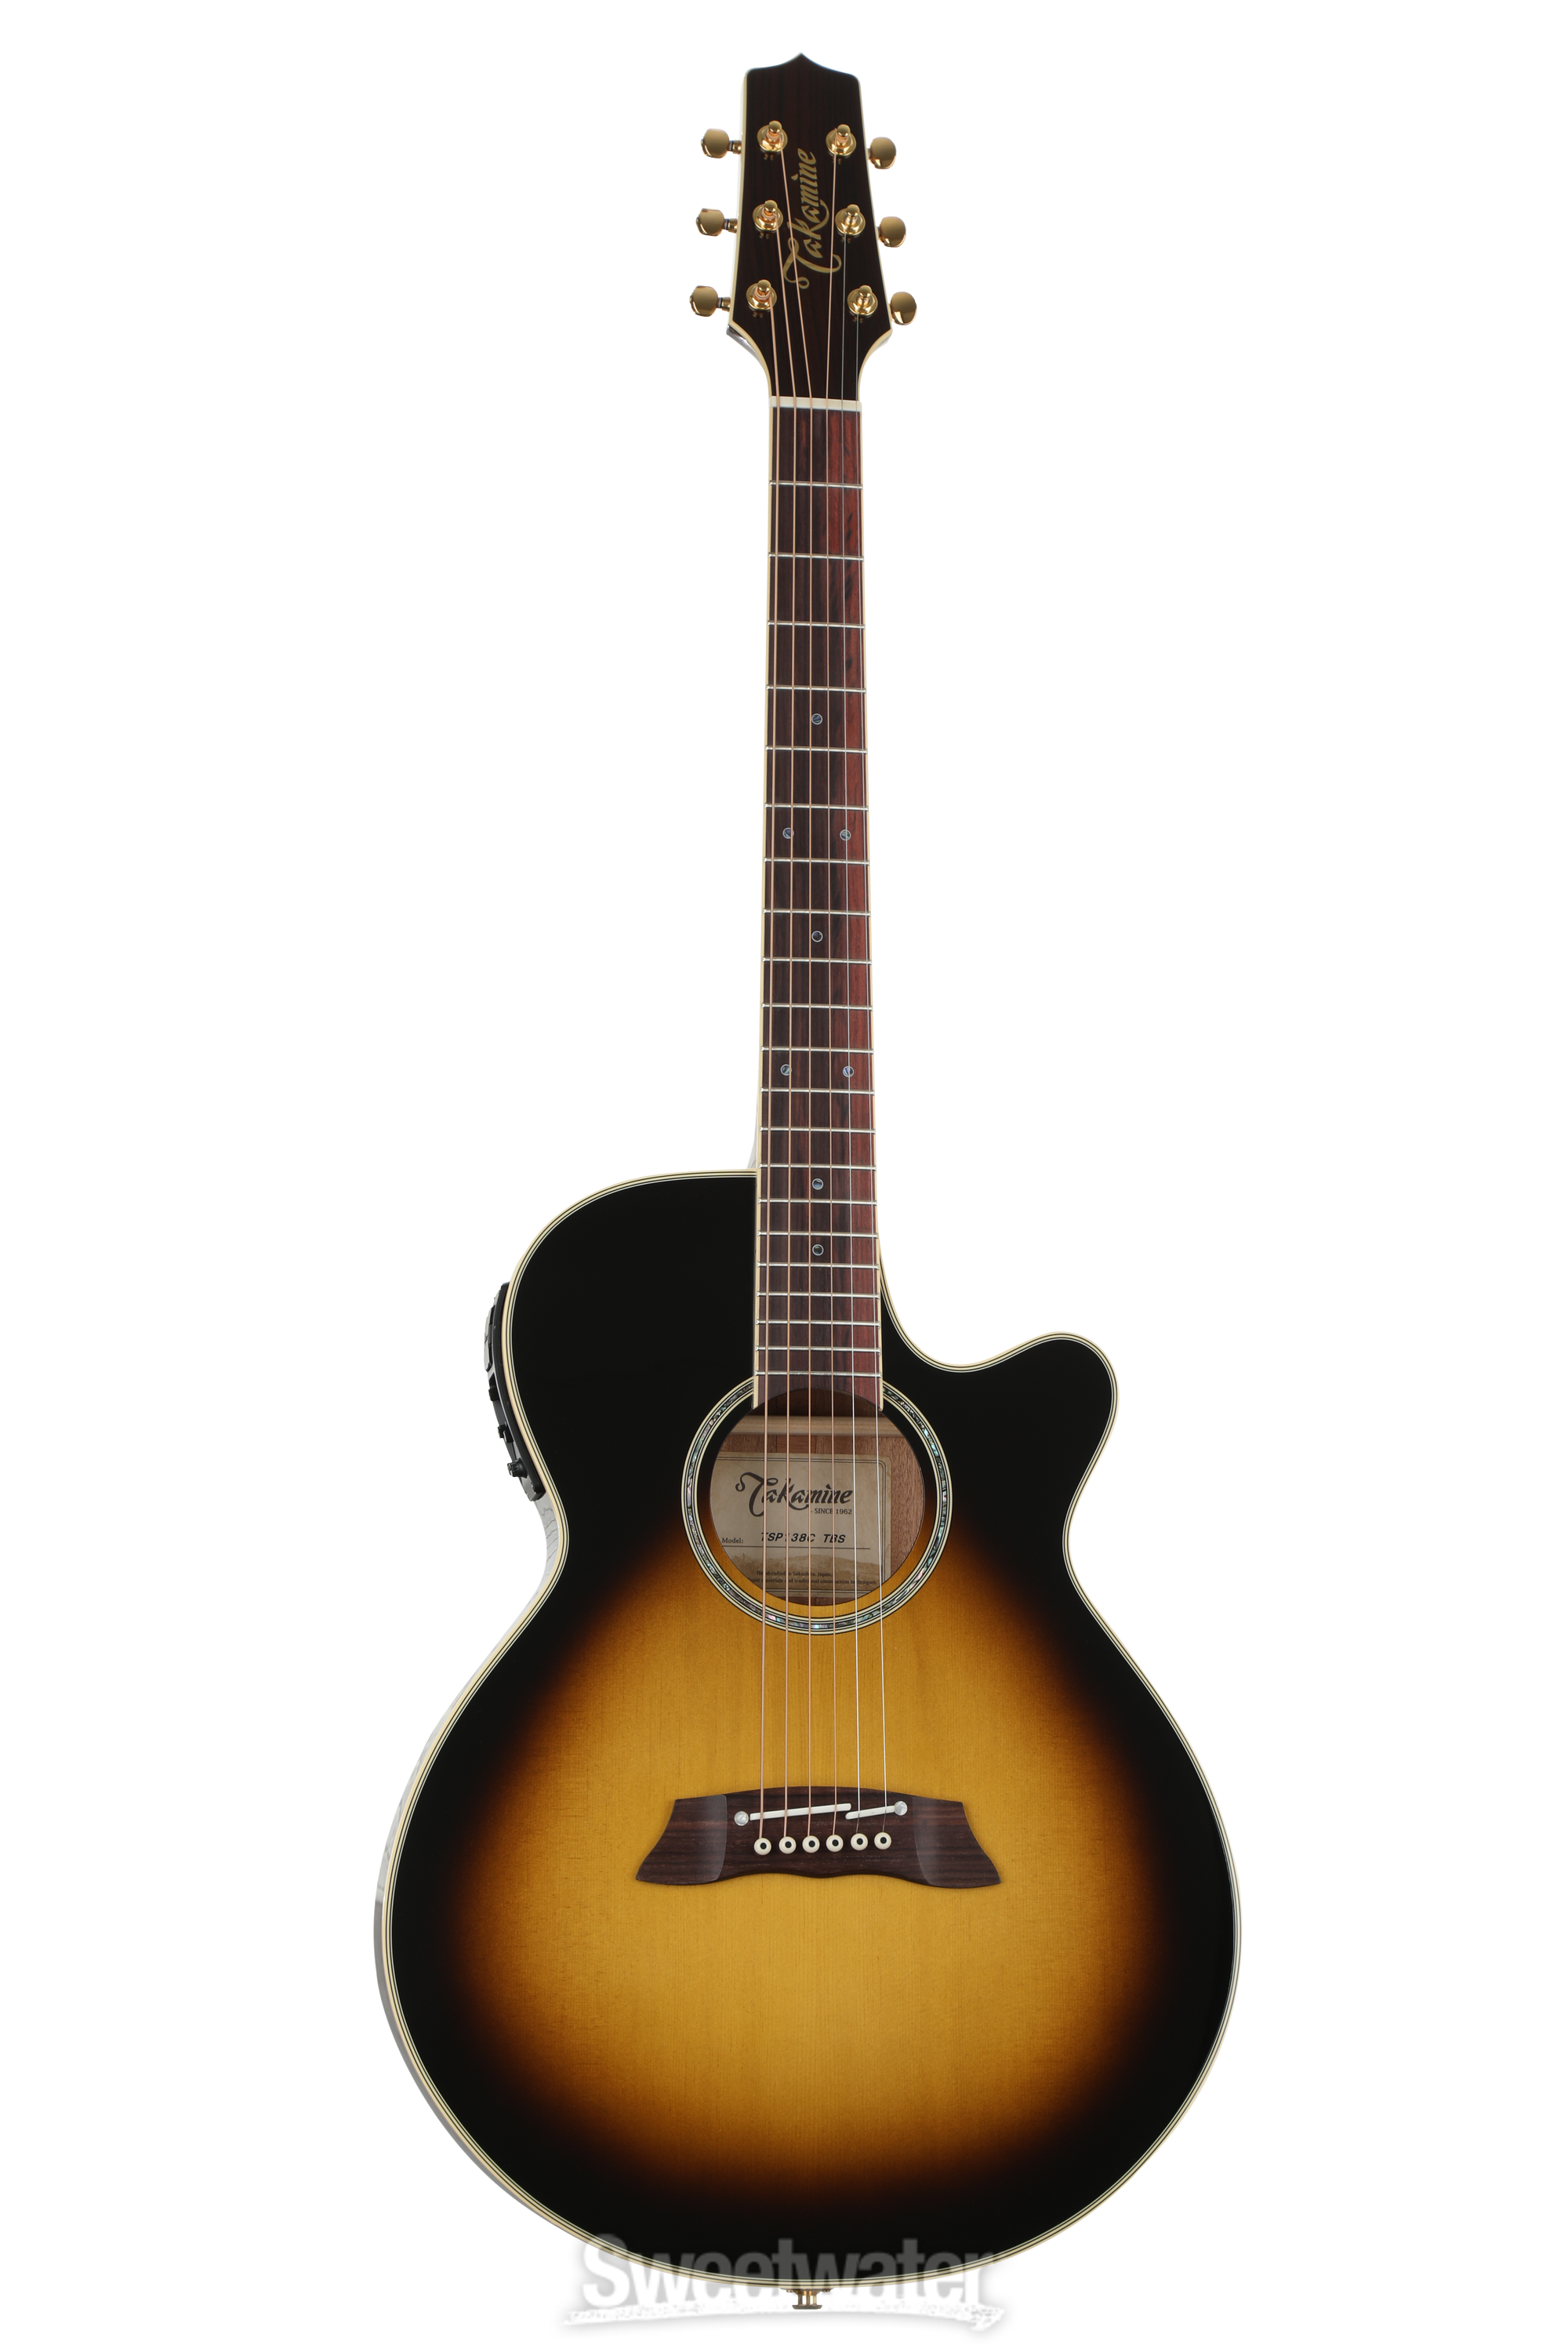 Takamine TSP138C Thinline Acoustic Electric Guitar Natural